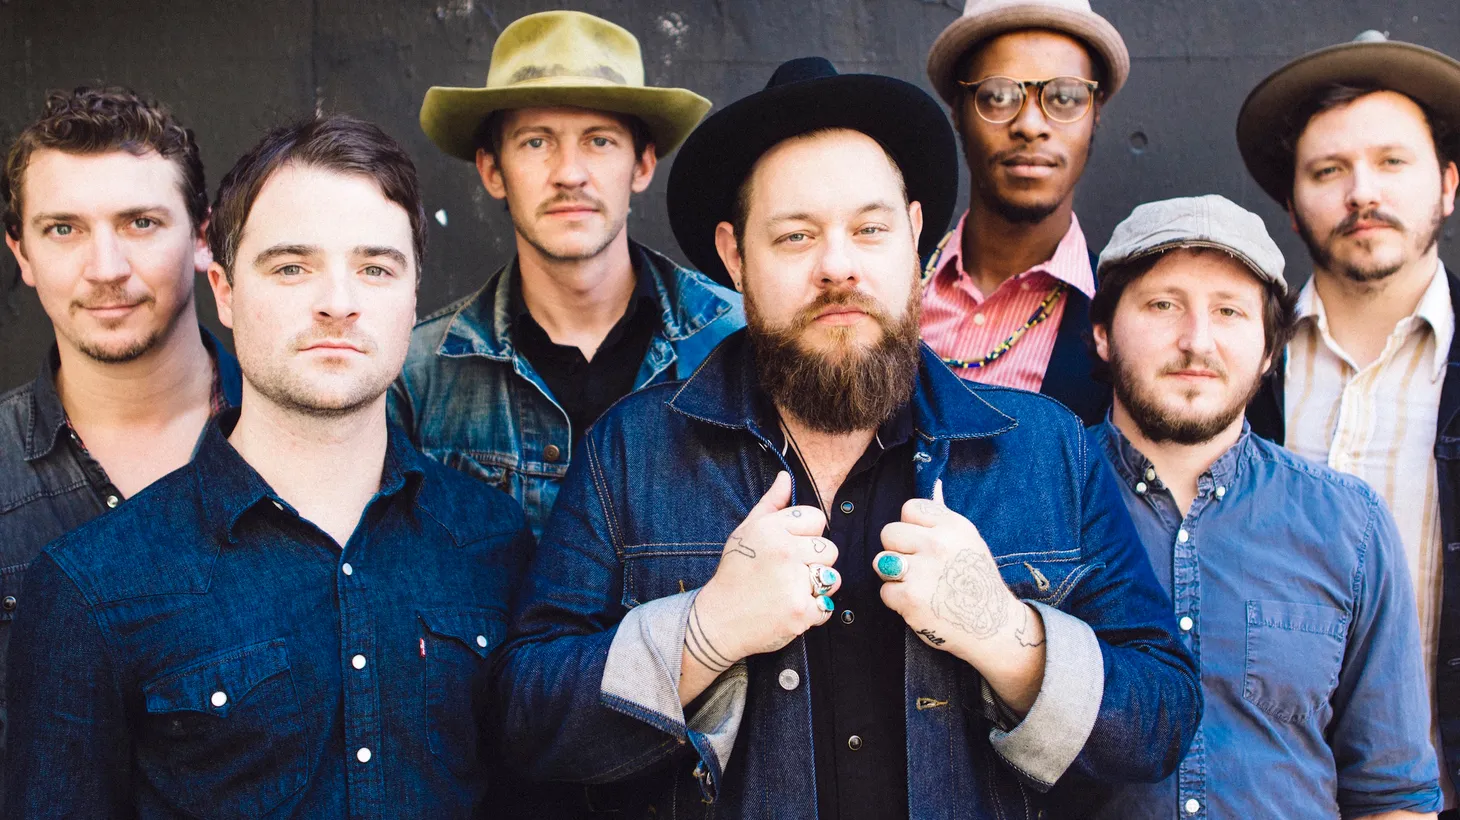 The soul stirring songs of Nathaniel Rateliff and the Night Sweats – combined with a bombastic live show – have quickly catapulted the band into the spotlight.